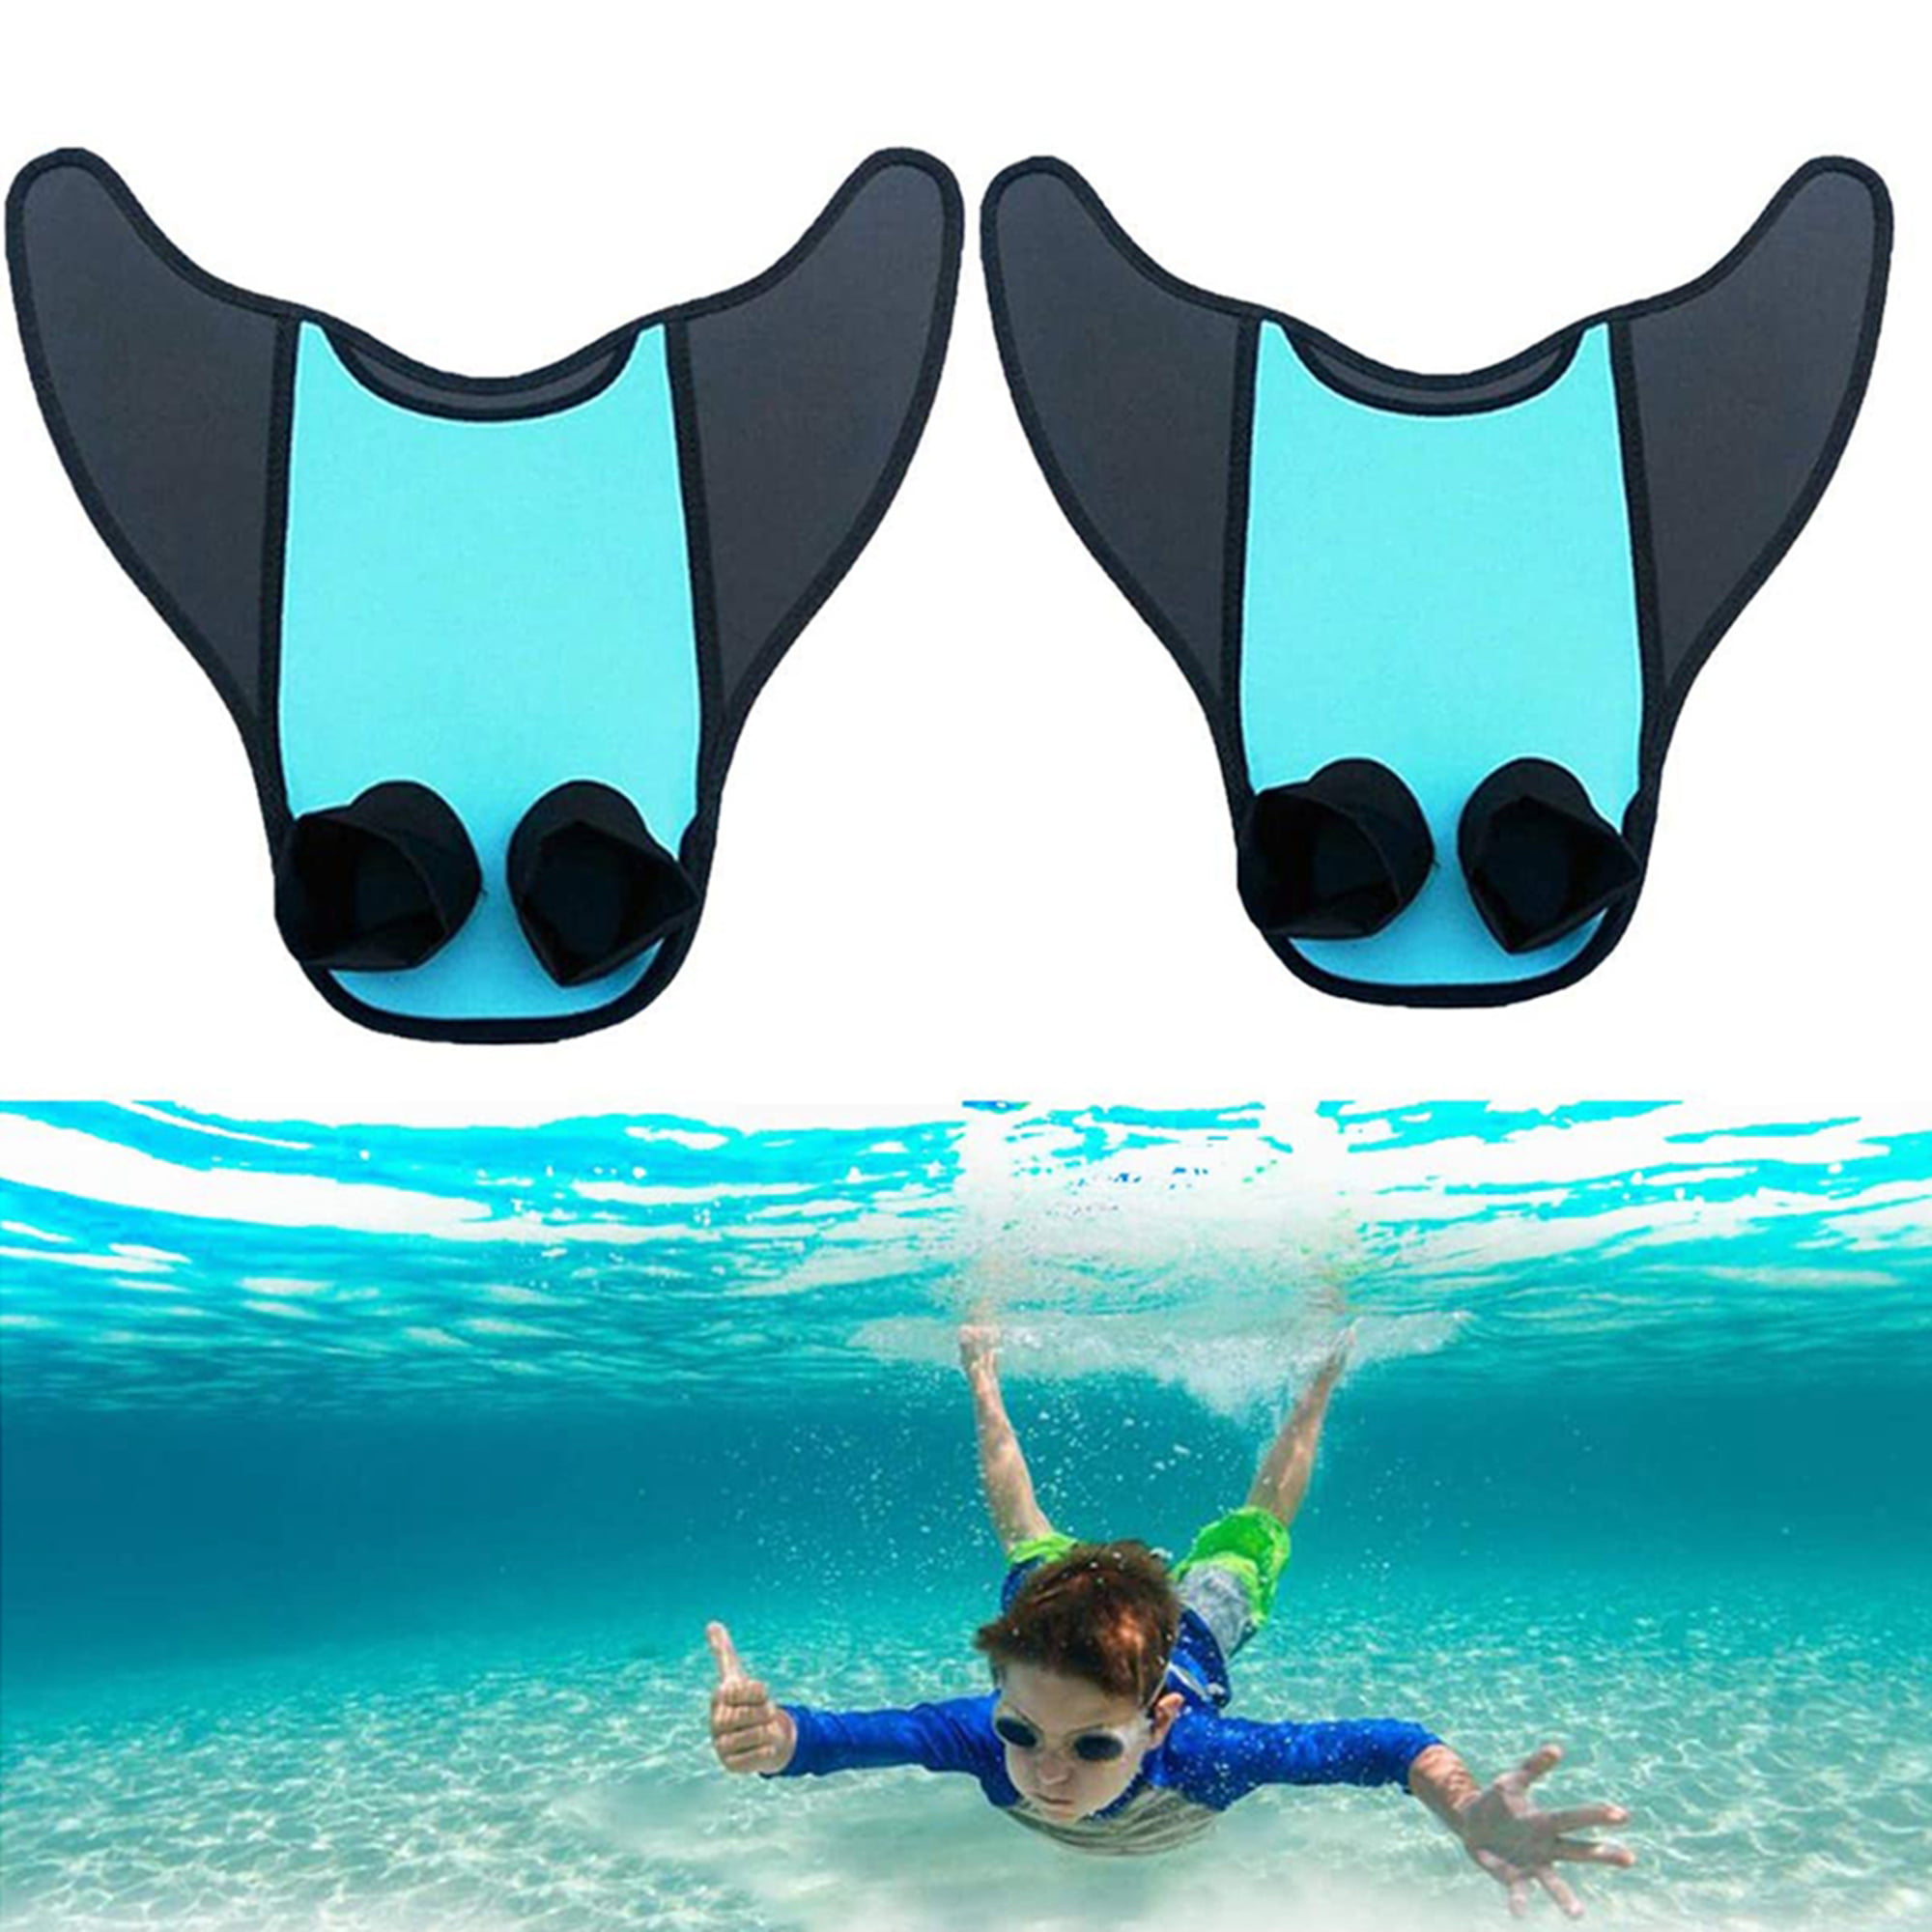 IOUTDOOR Mermaid Fins Monofin for Swimming,Training Diving Fins Swimming Fins for Kids Adults 